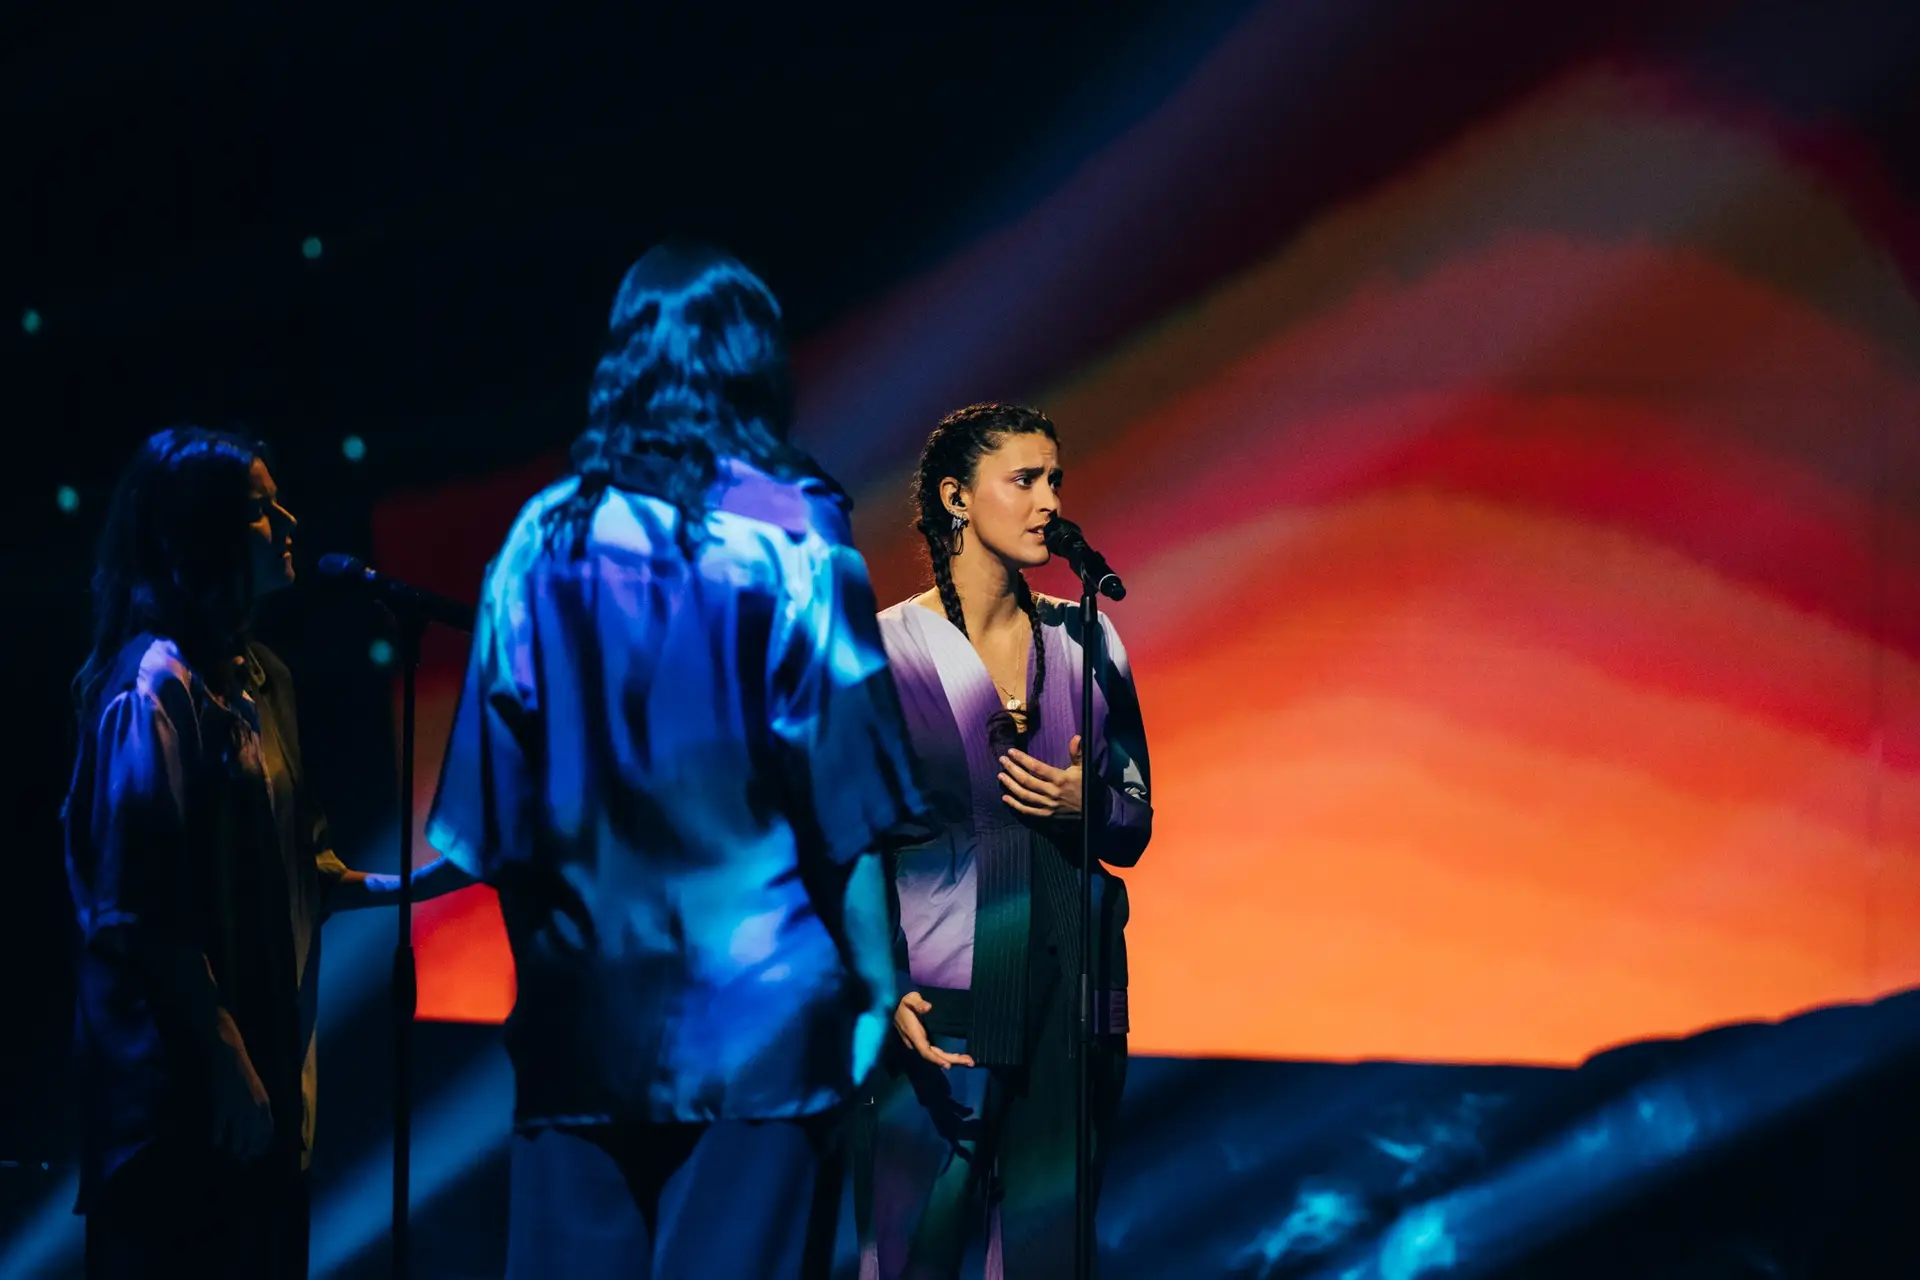 Maru in the first semi-finals of the 2022 Eurovision Song Contest